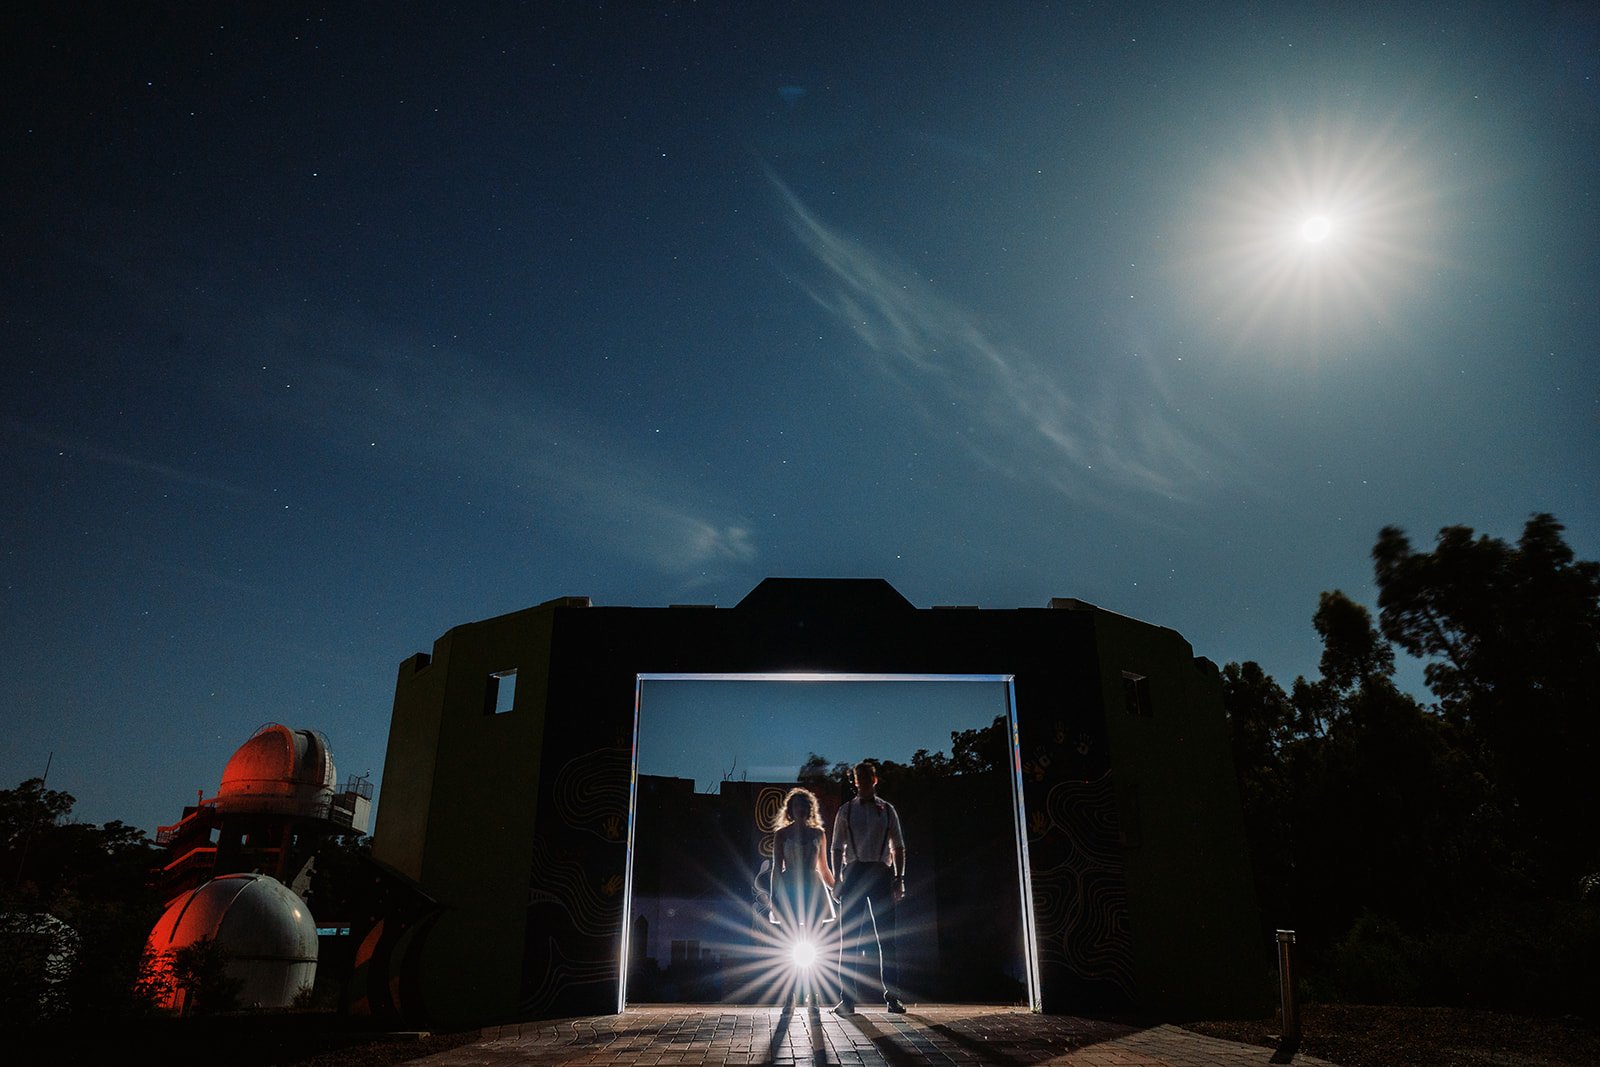 When you get married at an Observatory, why not do an epic starry night photo shoot?!

Love this stunning photo from @wildfeatherscreative of gorgeous Jen &amp; Justin up at the Perth Observatory (did you know you can get married up at the Observator